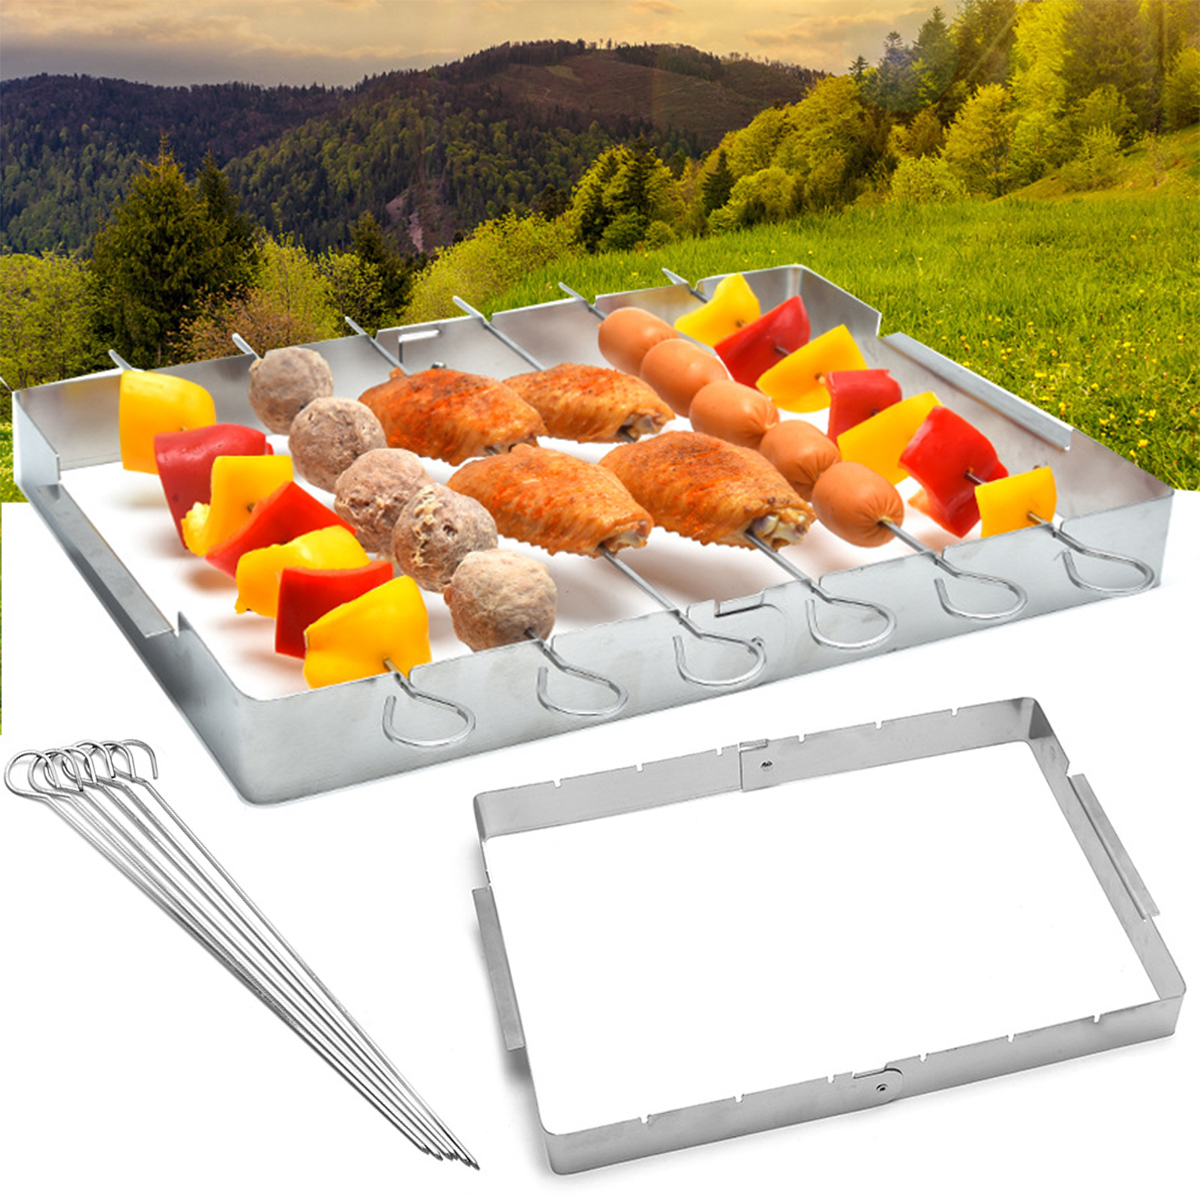 Barbecue Skewer Shish Kabob Set，Foldable Stainless Steel Grill Rack Set with 6 pcs Skewers for Party and Home - image 3 of 8